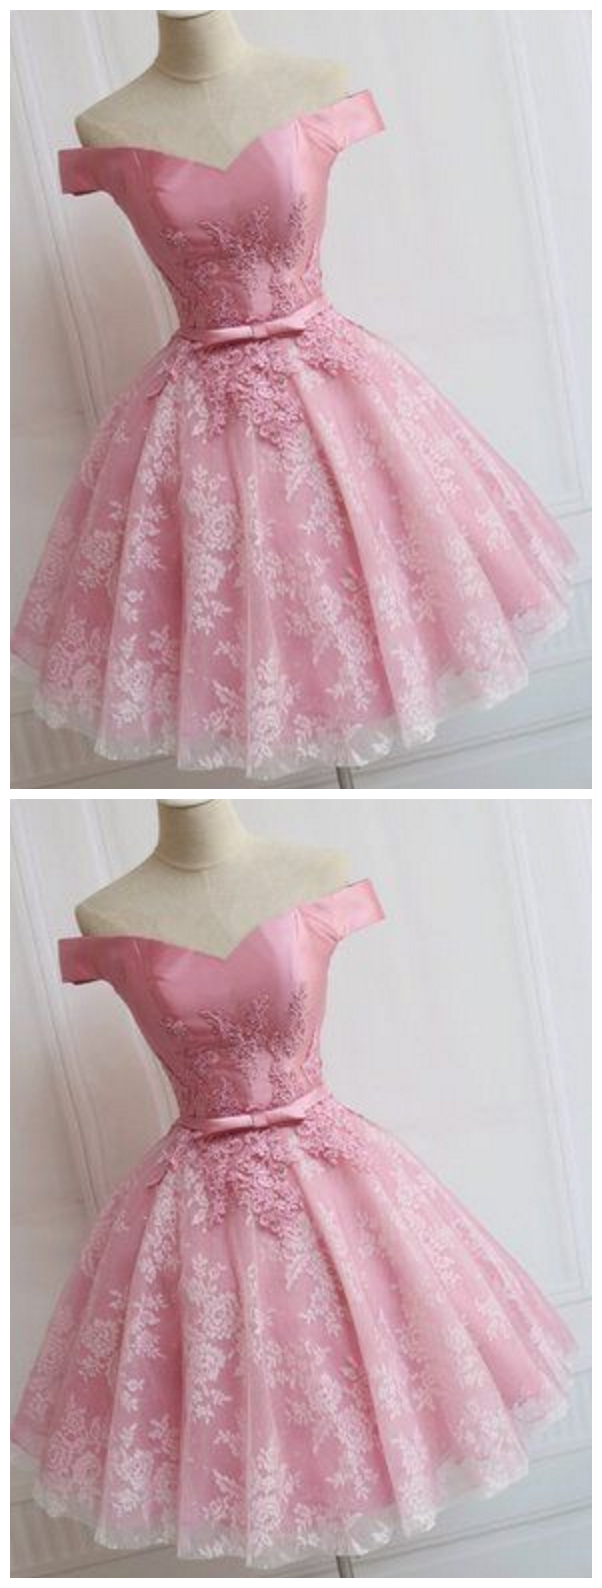 Prom Dress, Tulle Lace Prom Dresses,sexy Prom Gown, Homecoming Dress,prom Party Dress